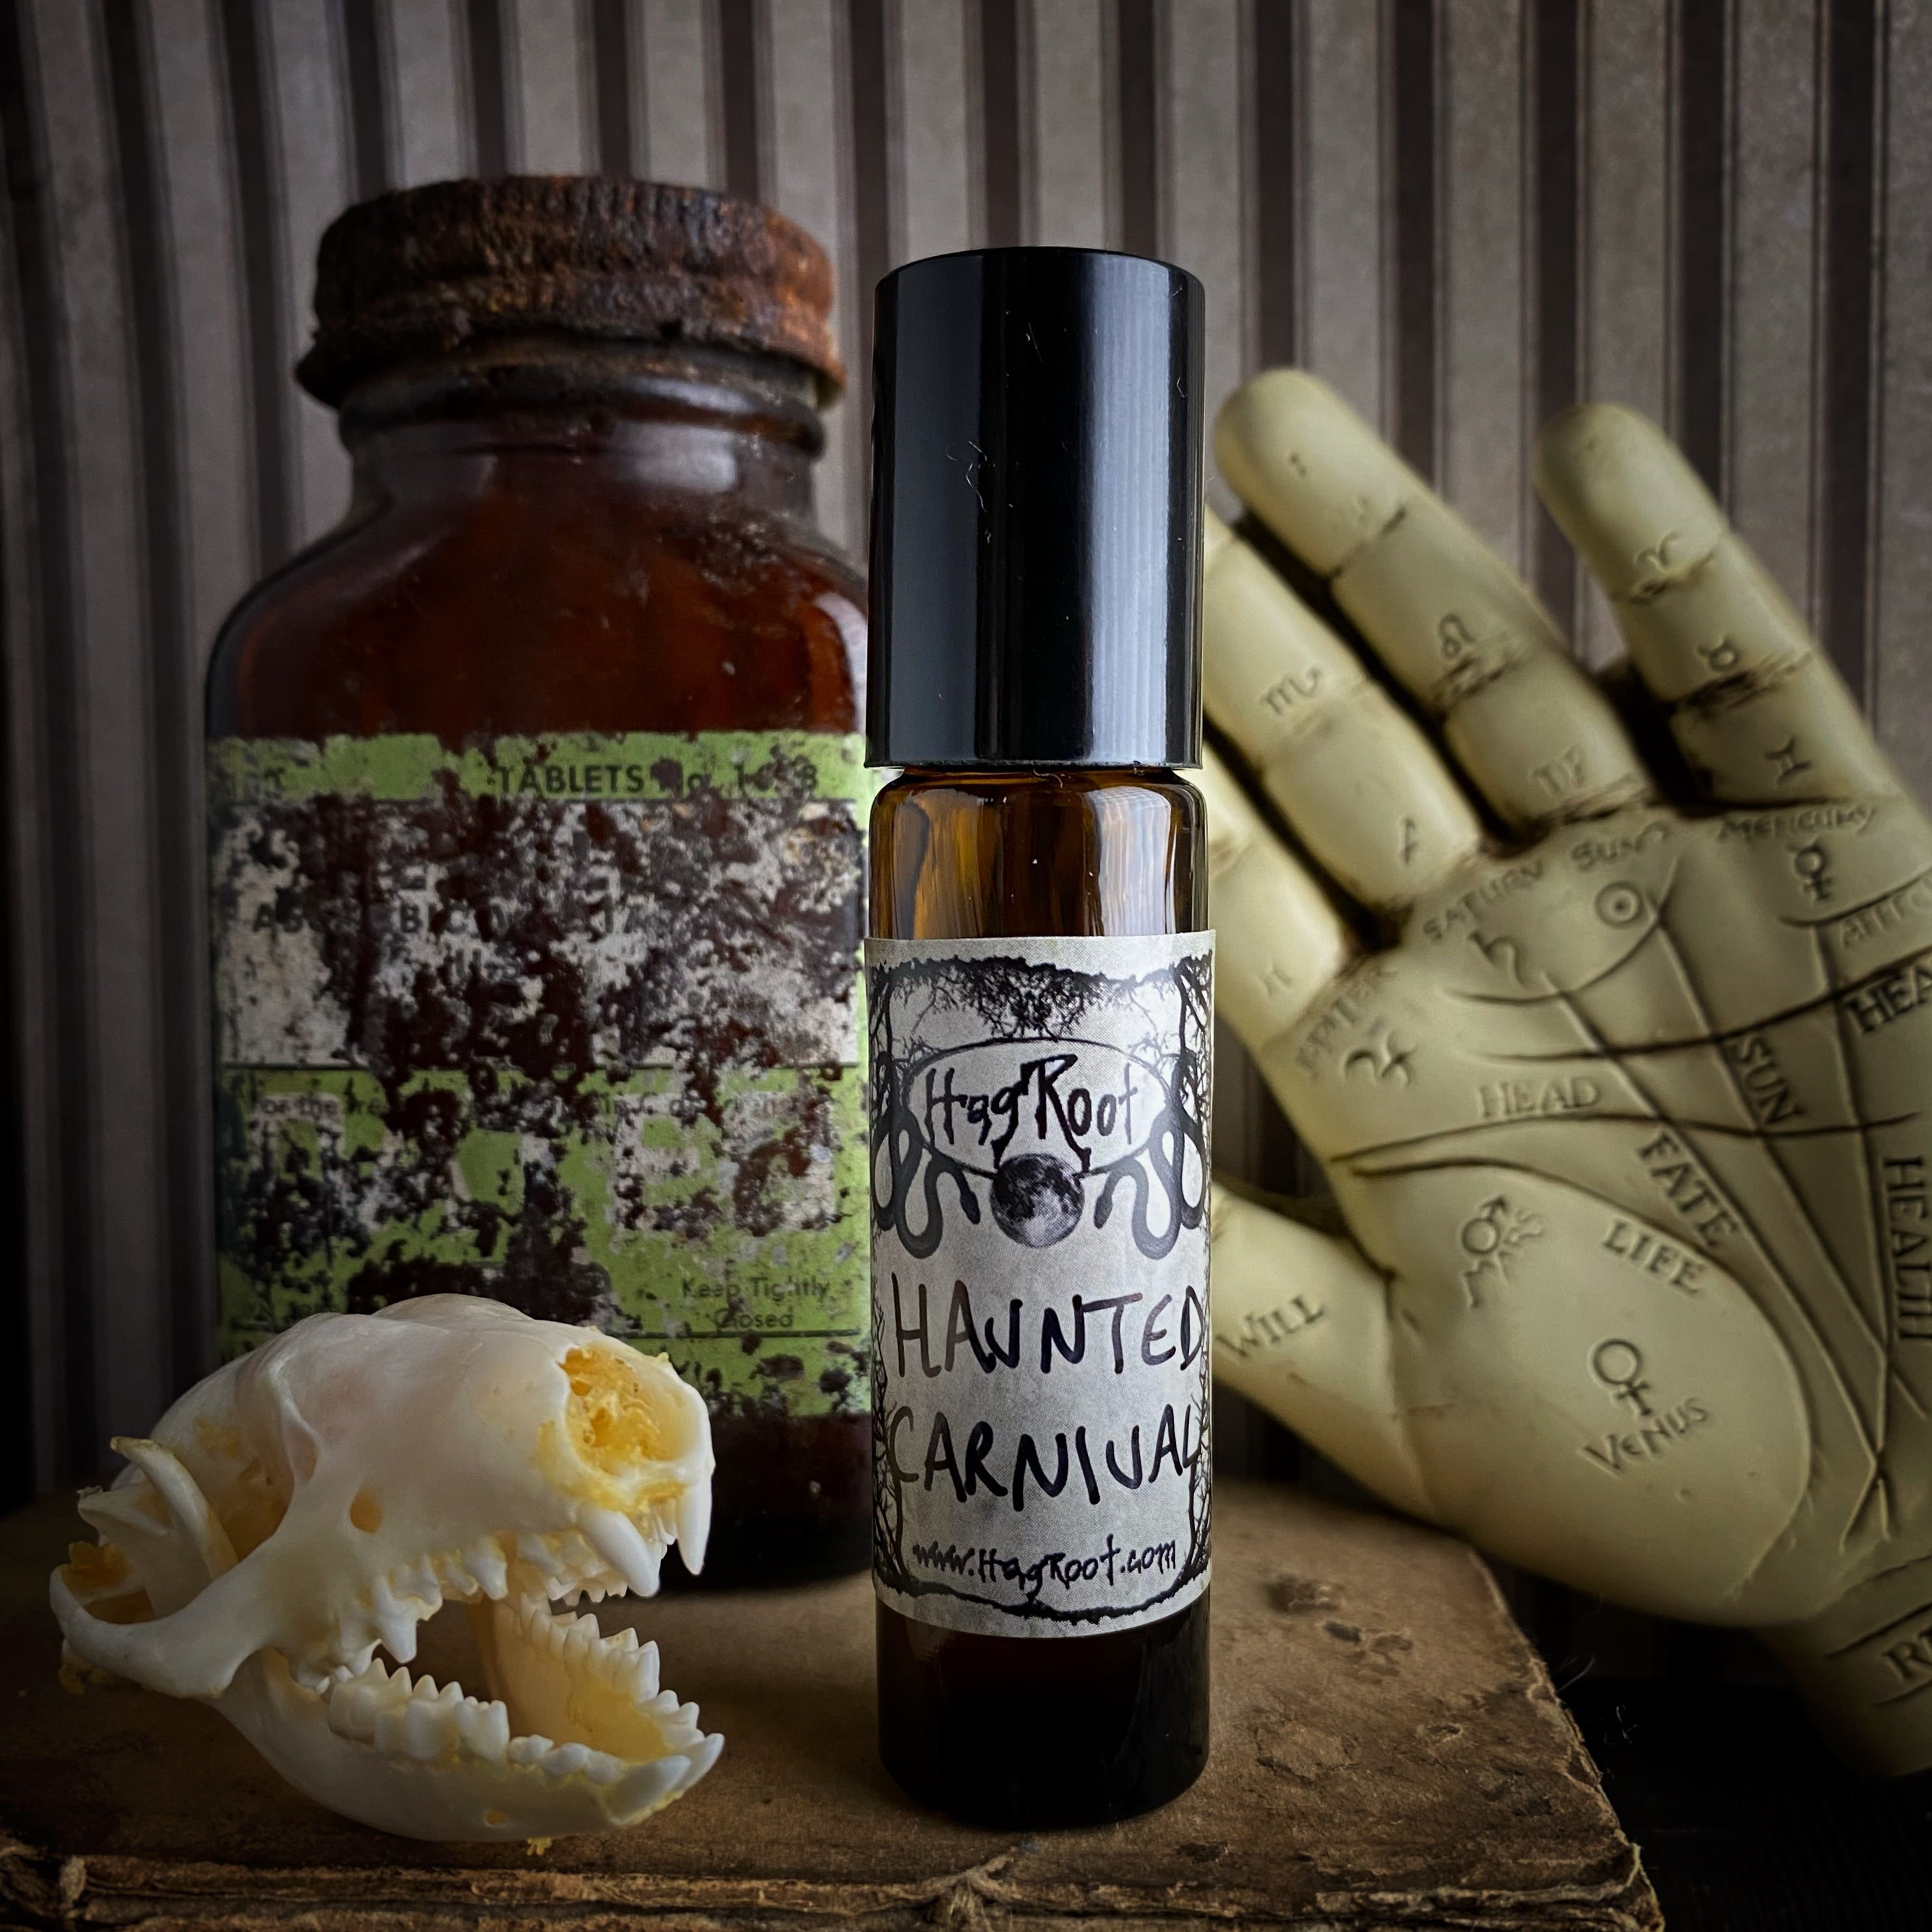 HAUNTED CARNIVAL-(Cotton Candy, Buttered Popcorn, Hay, Toasted Marshmallows, Smoked Wood)-Perfume, Cologne, Anointing, Ritual Oil